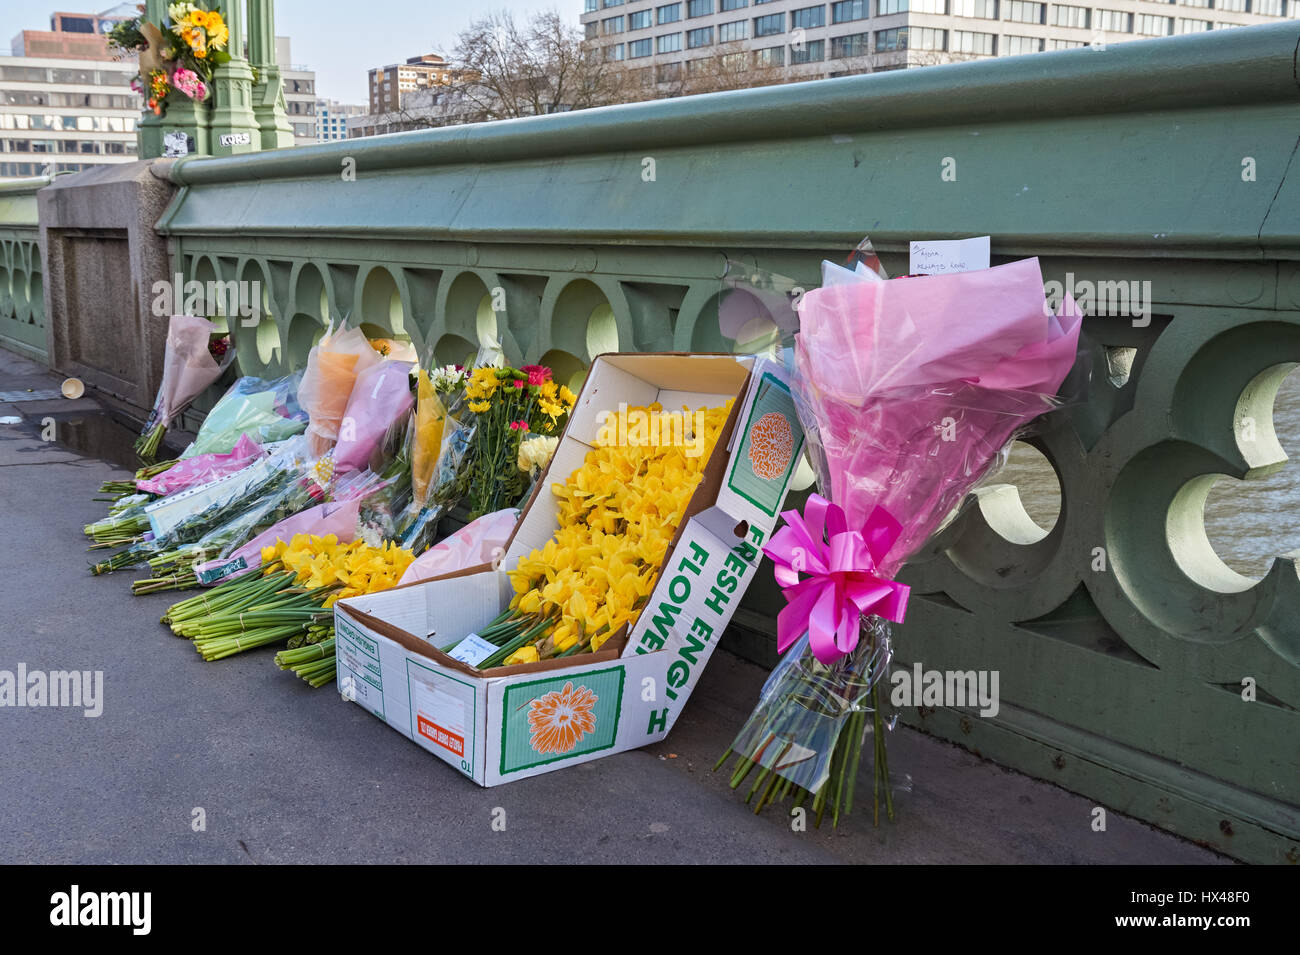 London, UK. 24th March, 2017. Floral tributes to the victims on Westminster Bridge after the terrorist attack. Credit: Marcin Rogozinski/Alamy Live News Stock Photo